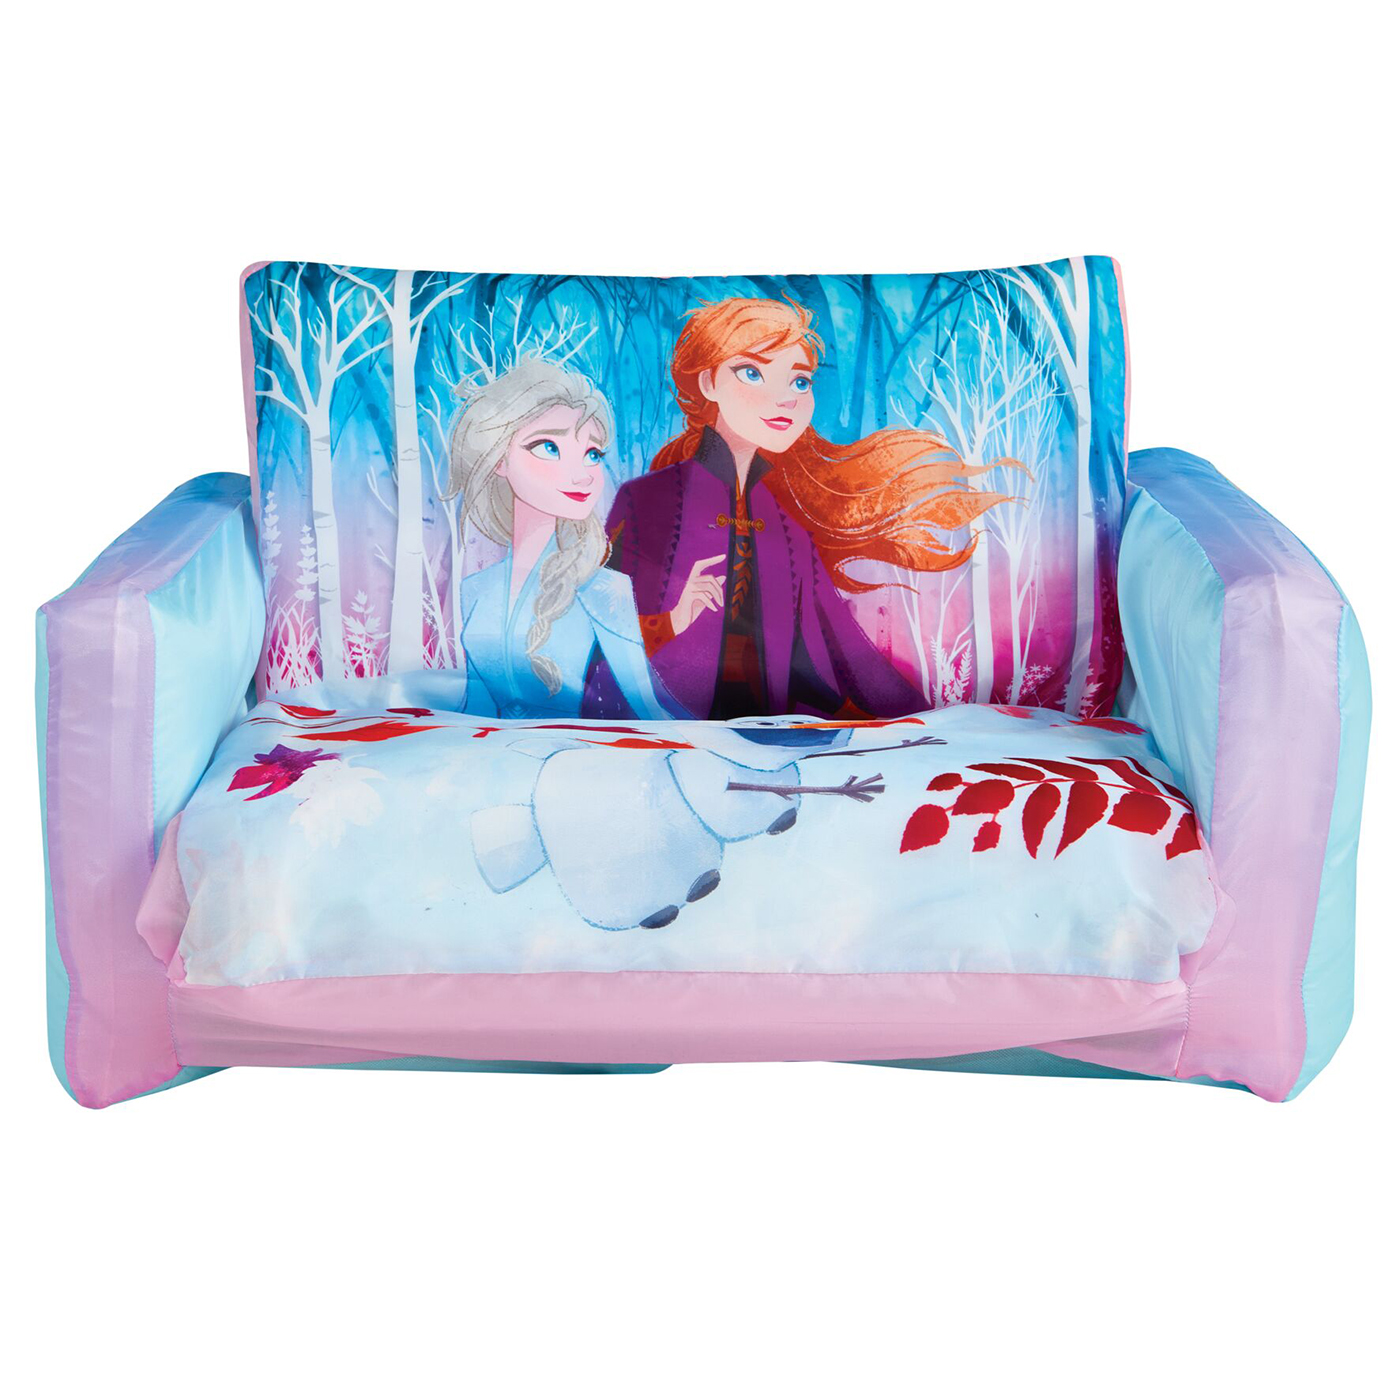 New Kids Flip out flipout sofa bed day bed Frozen Elsa Anna 